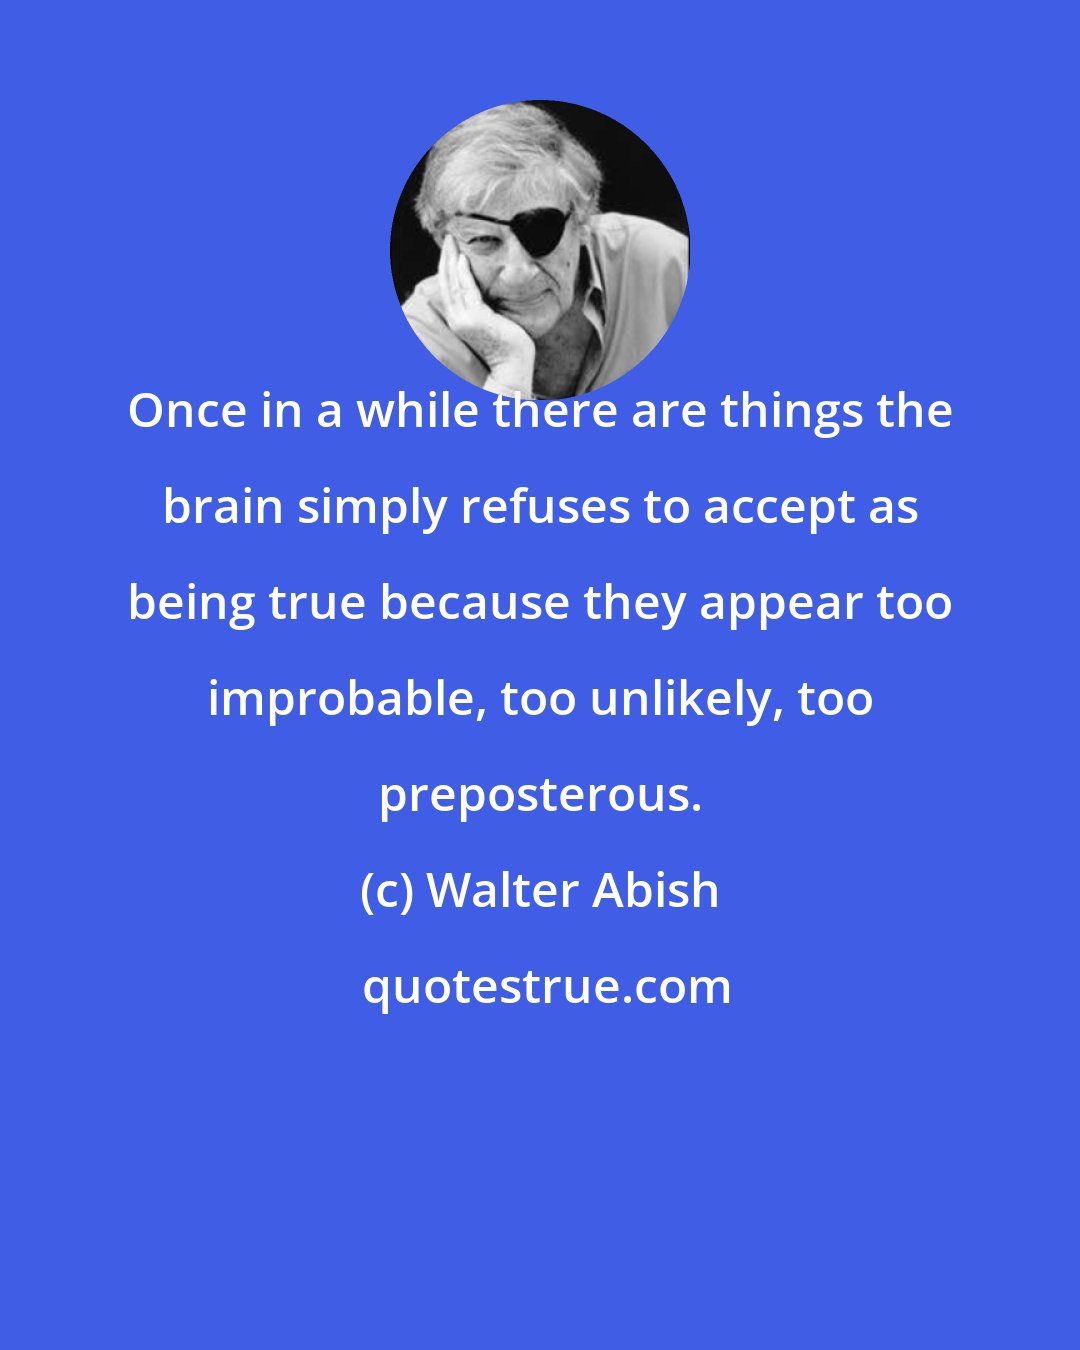 Walter Abish: Once in a while there are things the brain simply refuses to accept as being true because they appear too improbable, too unlikely, too preposterous.